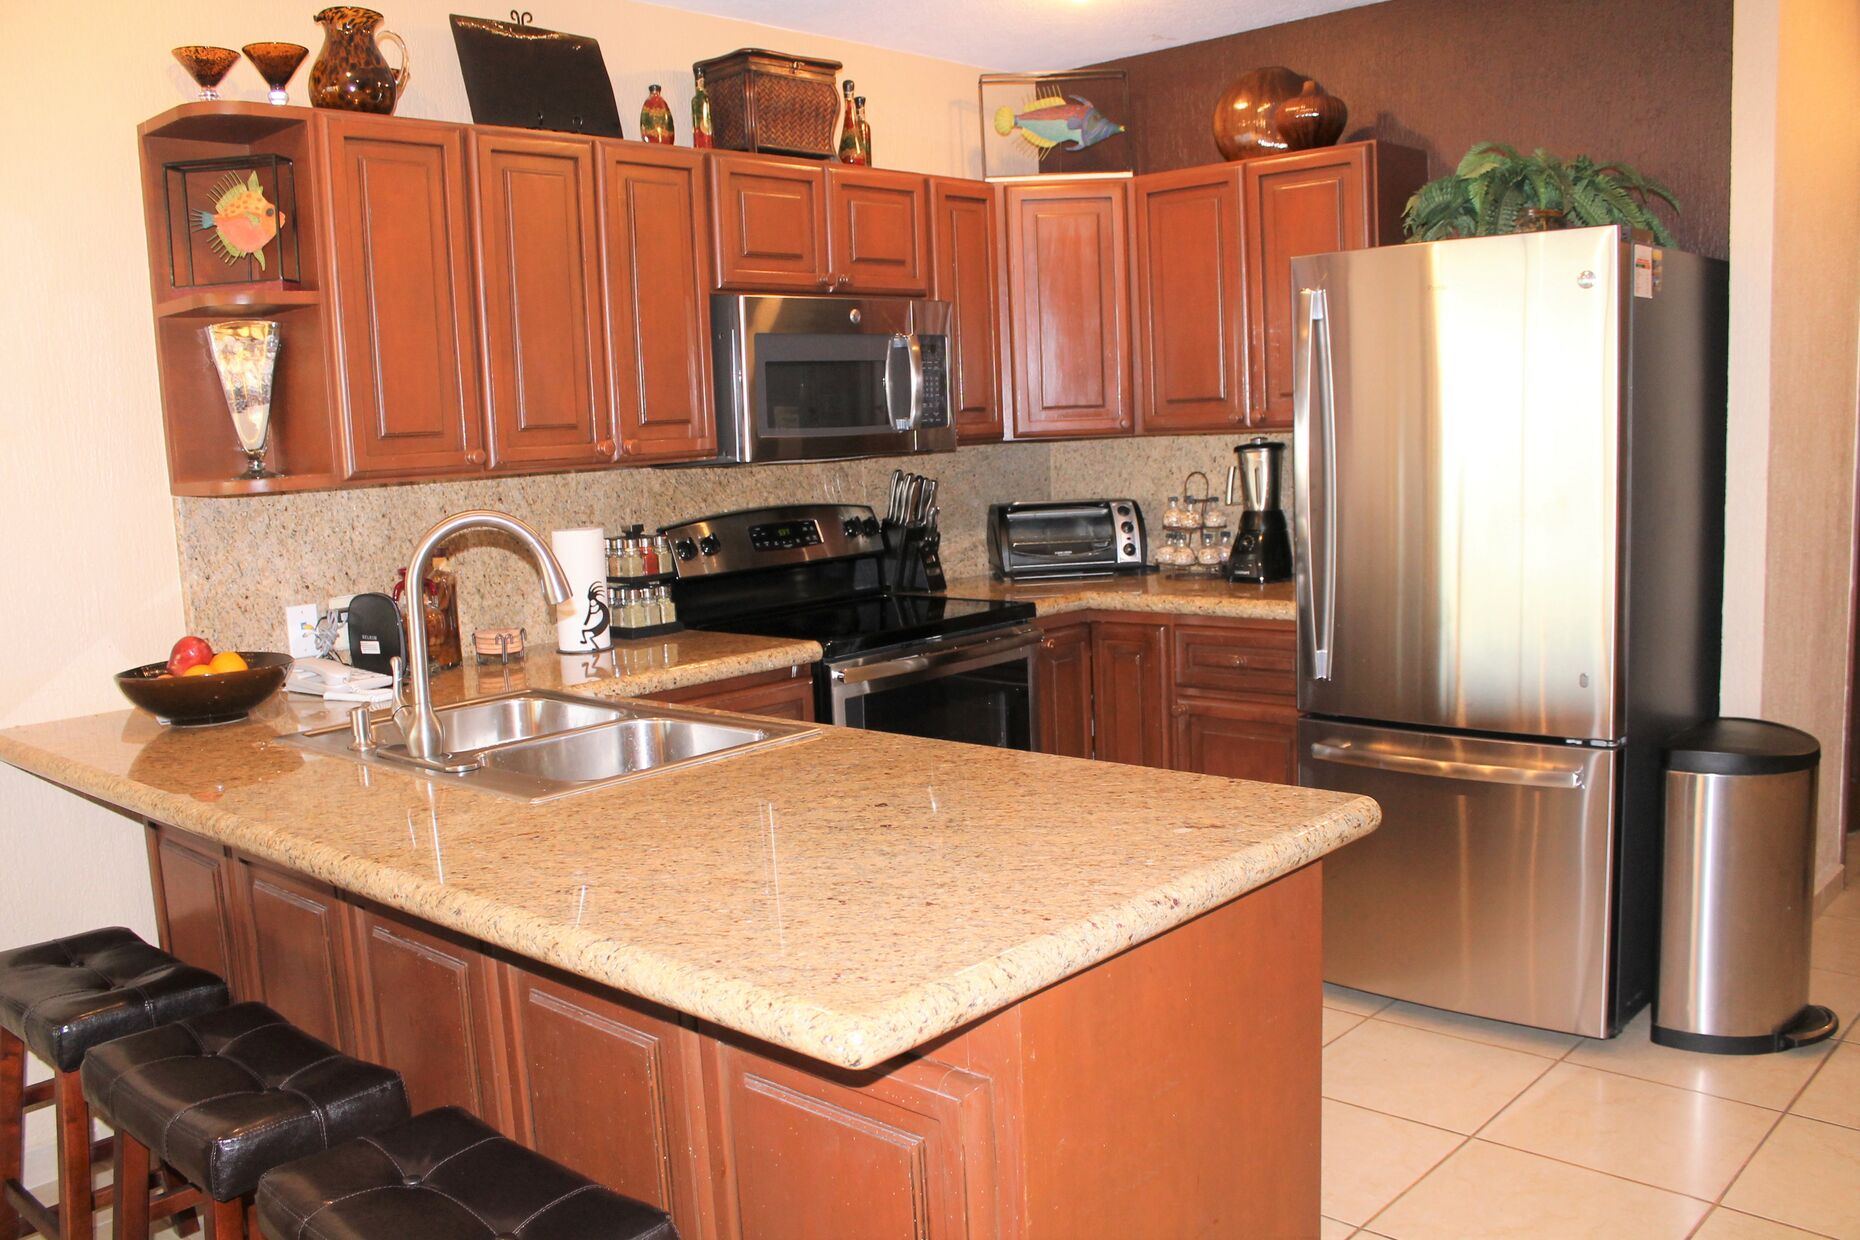 Kitchen - all new stainless steel appliances.